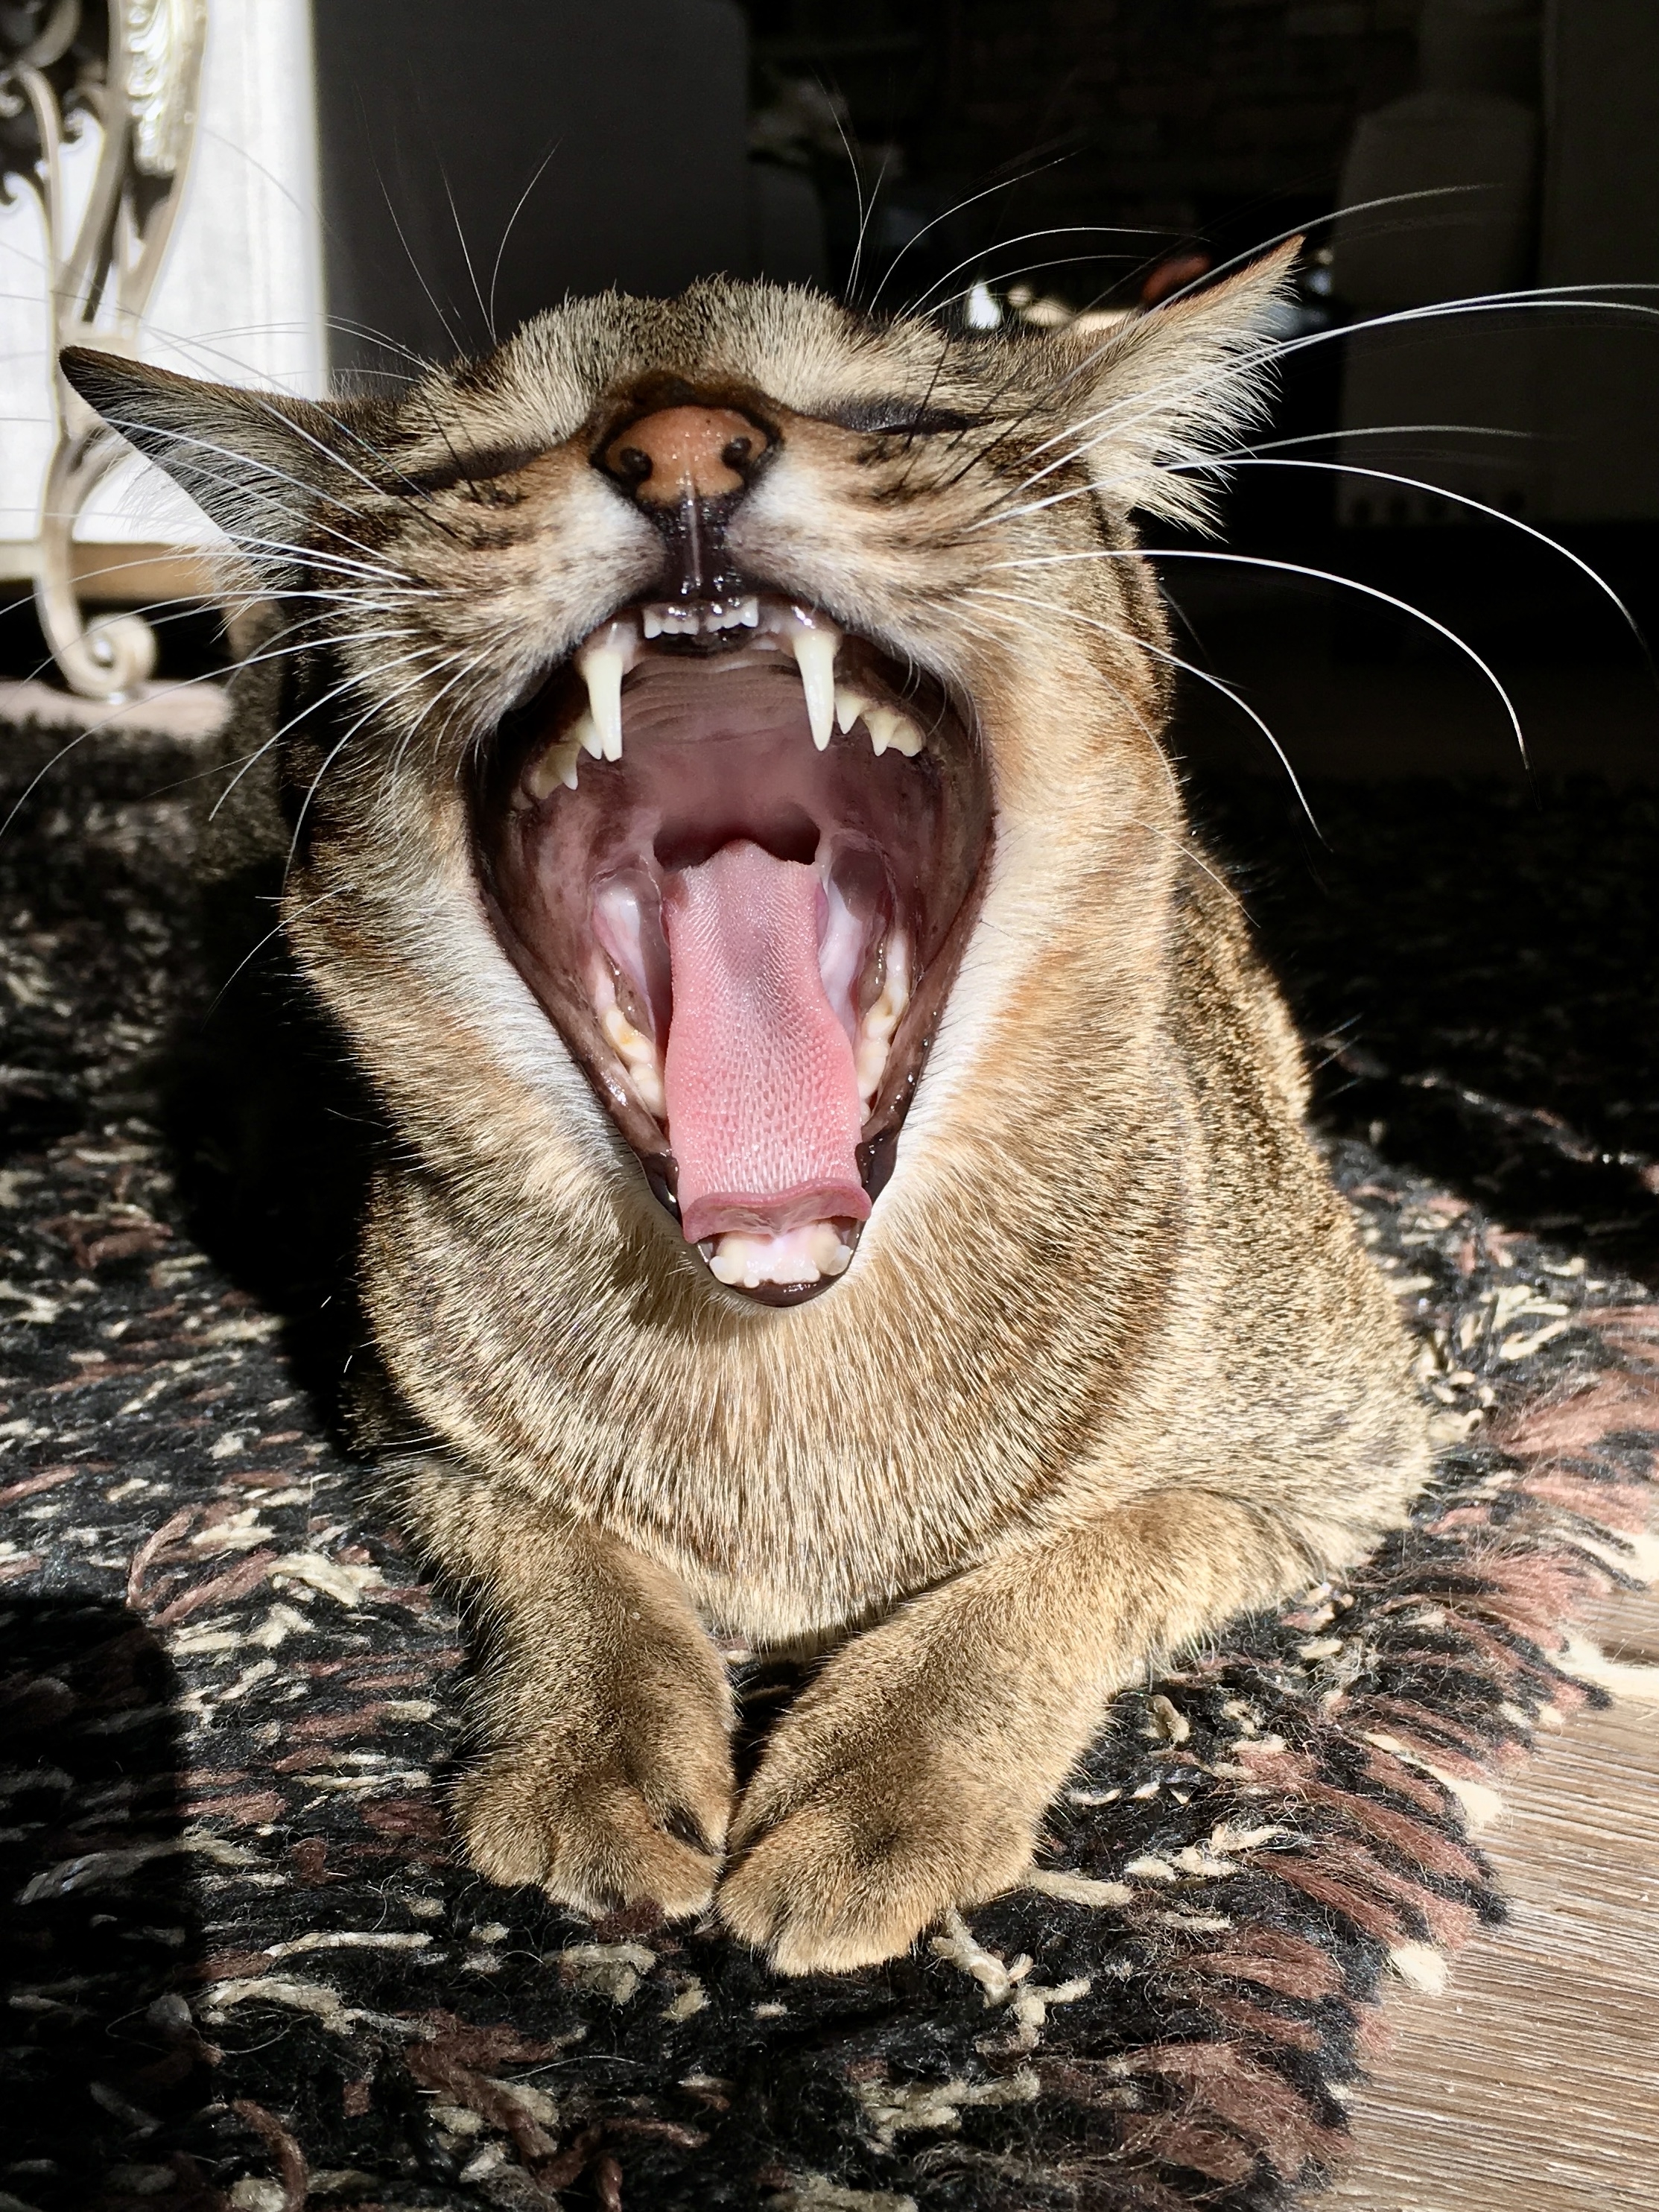 A cat with mouth wide open as if yawning,